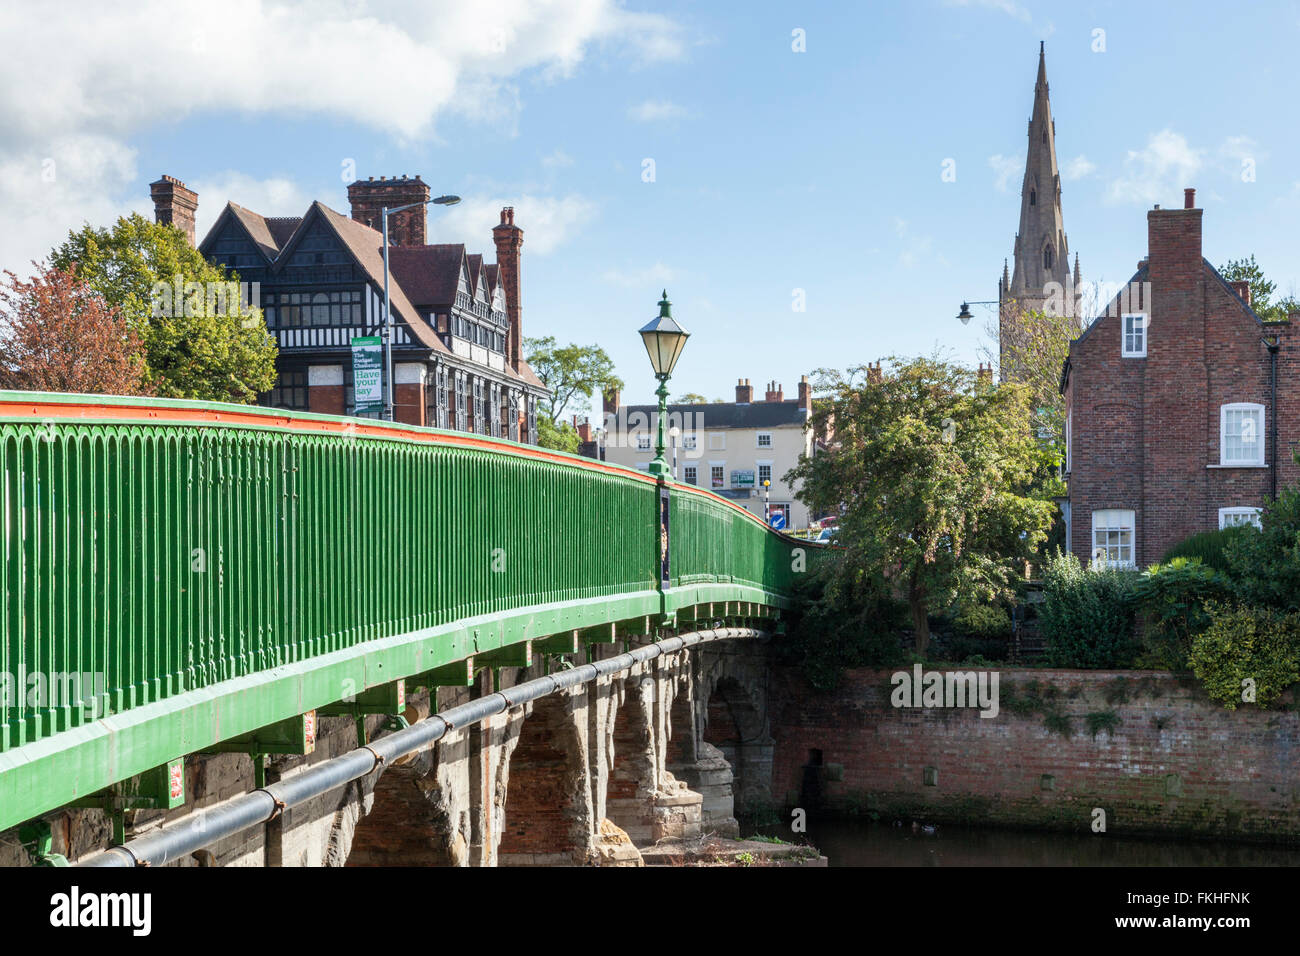 The approach over the River Trent to the town centre of Newark on Trent, Nottinghamshire, England, UK Stock Photo